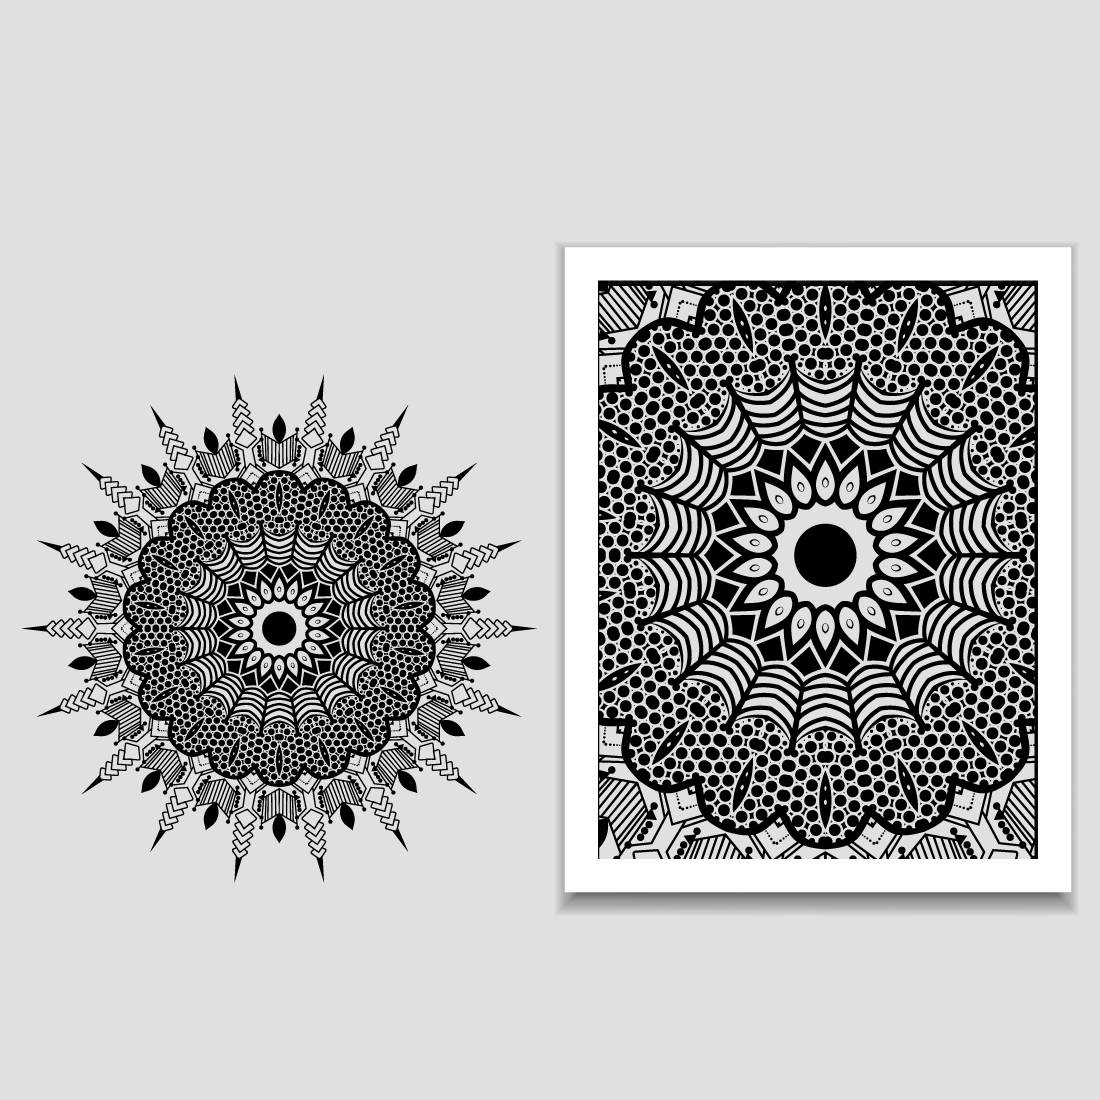 Black and white drawing of a sunflower.